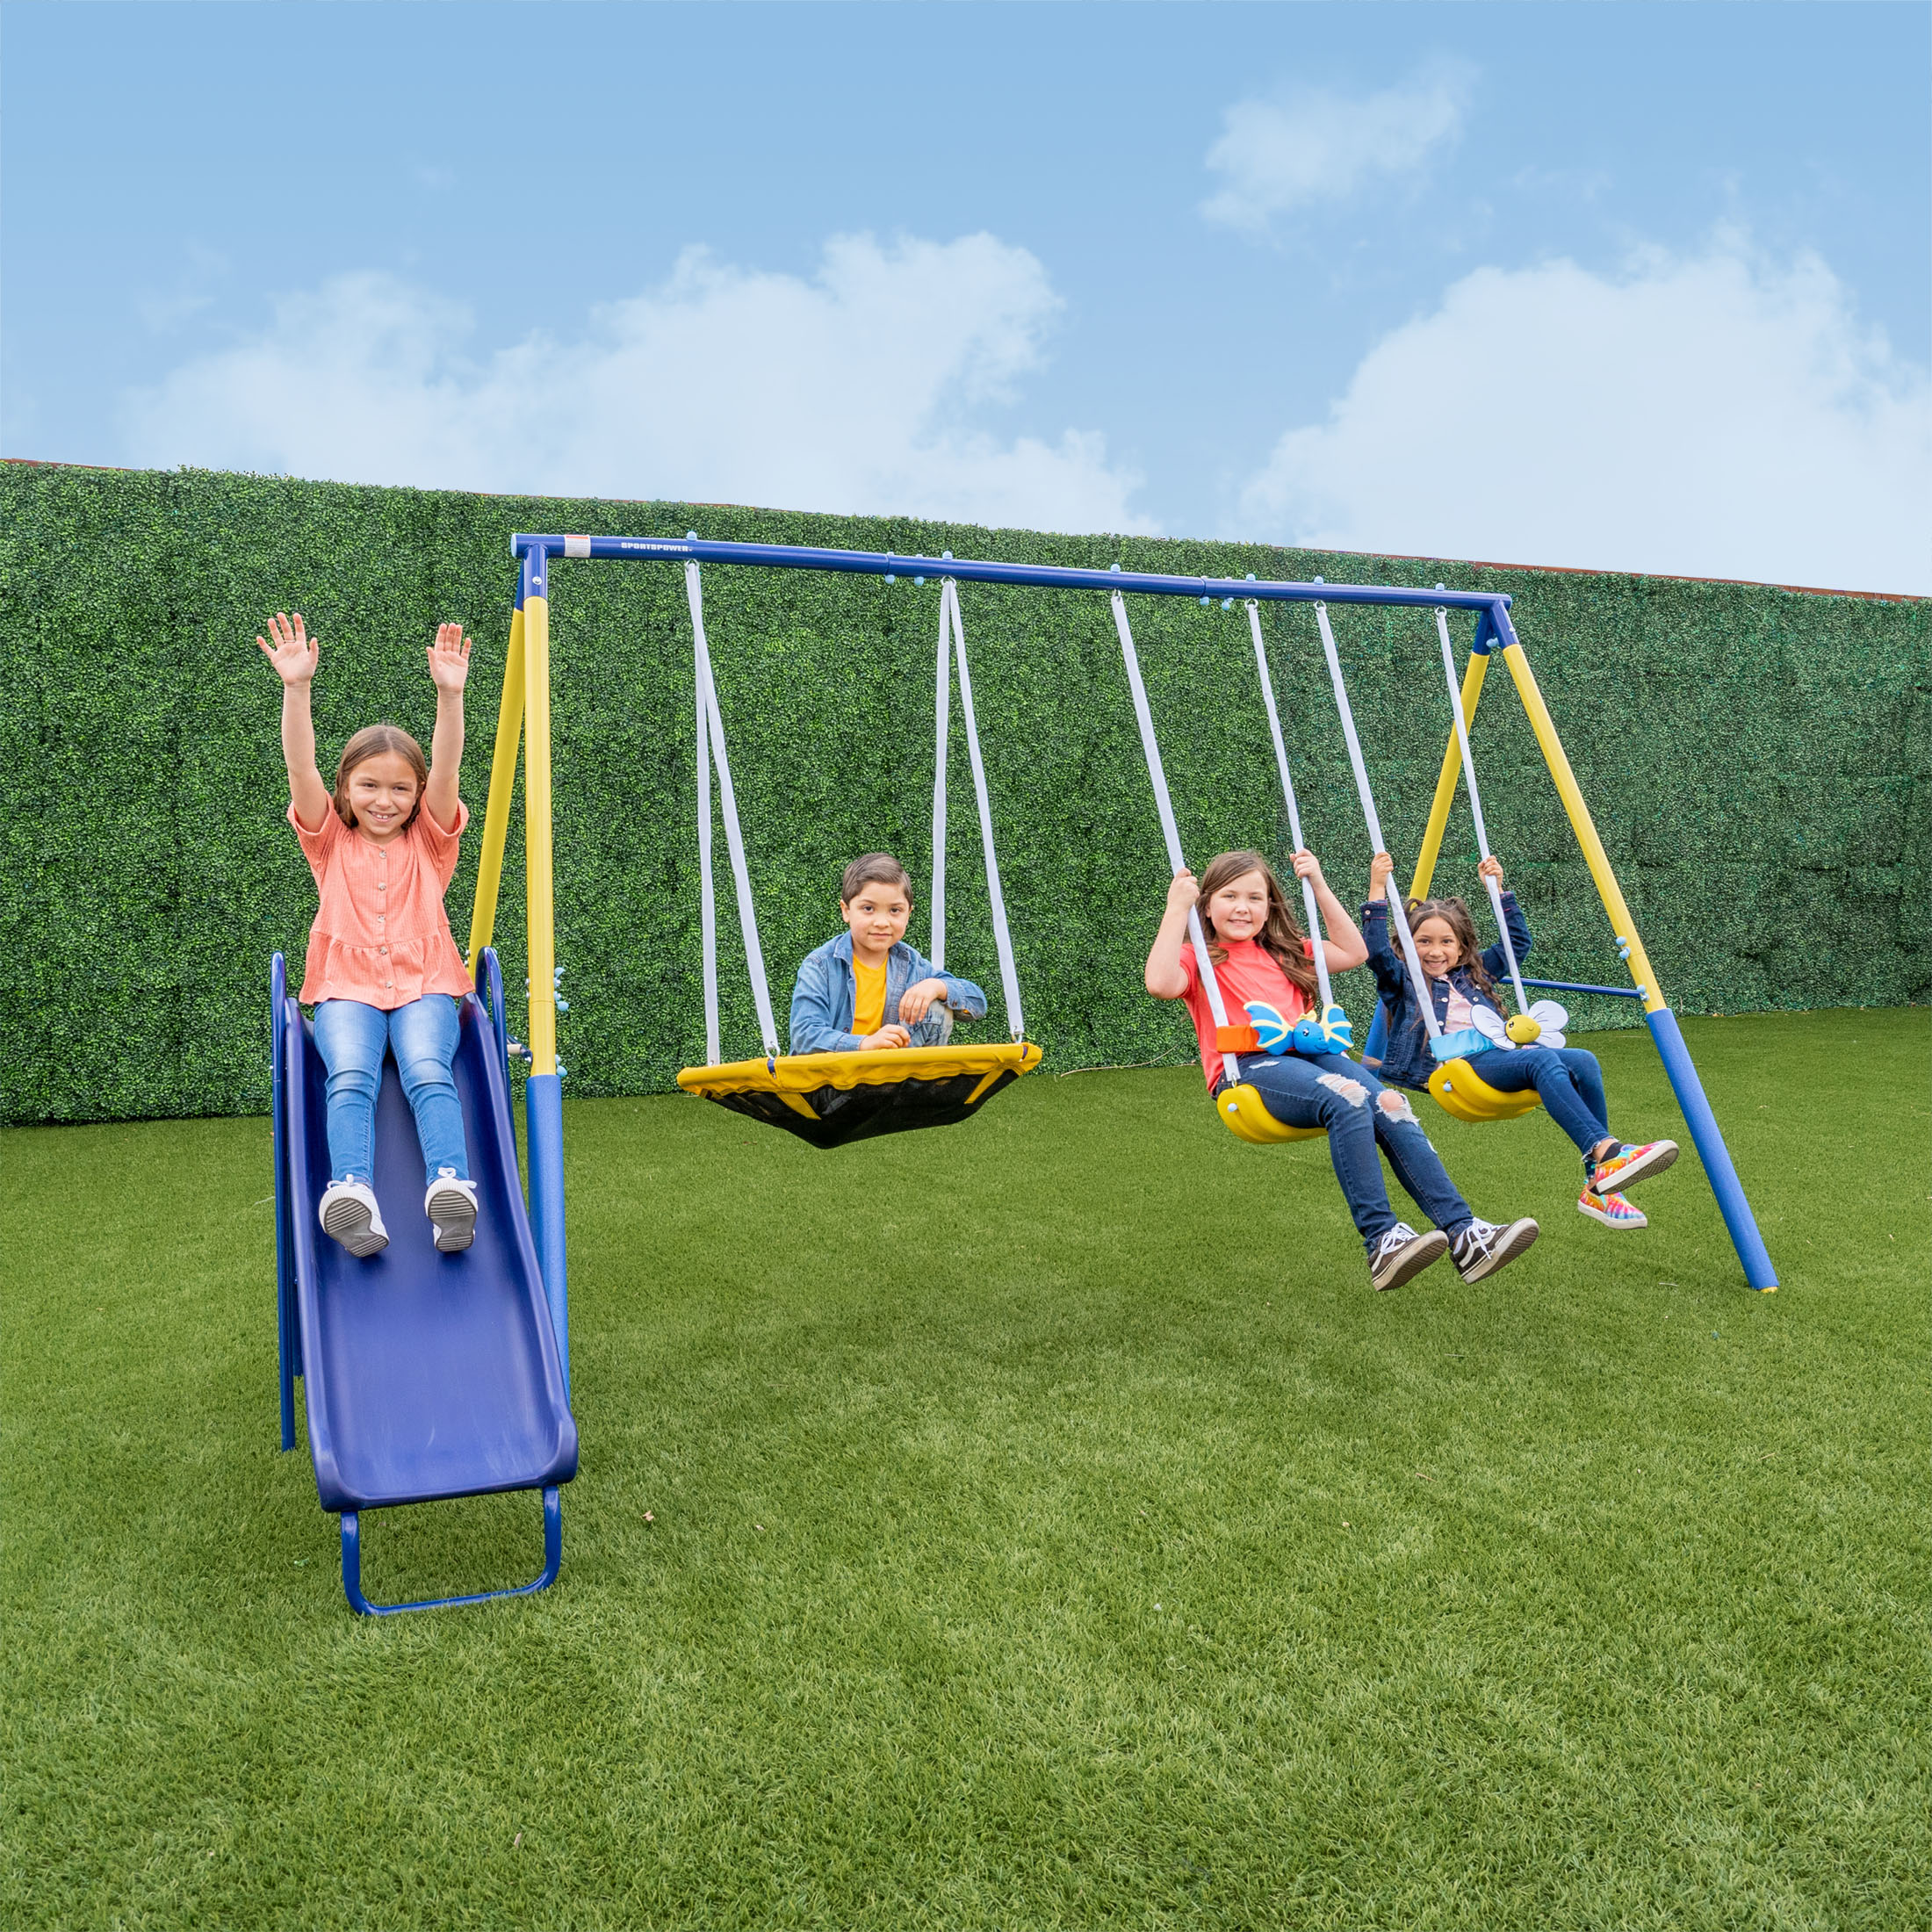 Sportspower Super Flyer Swing Set with 2 Flying Buddies, Saucer Swing, 2 Swings, and Lifetime Warranty on Blow Molded Slide - image 2 of 14